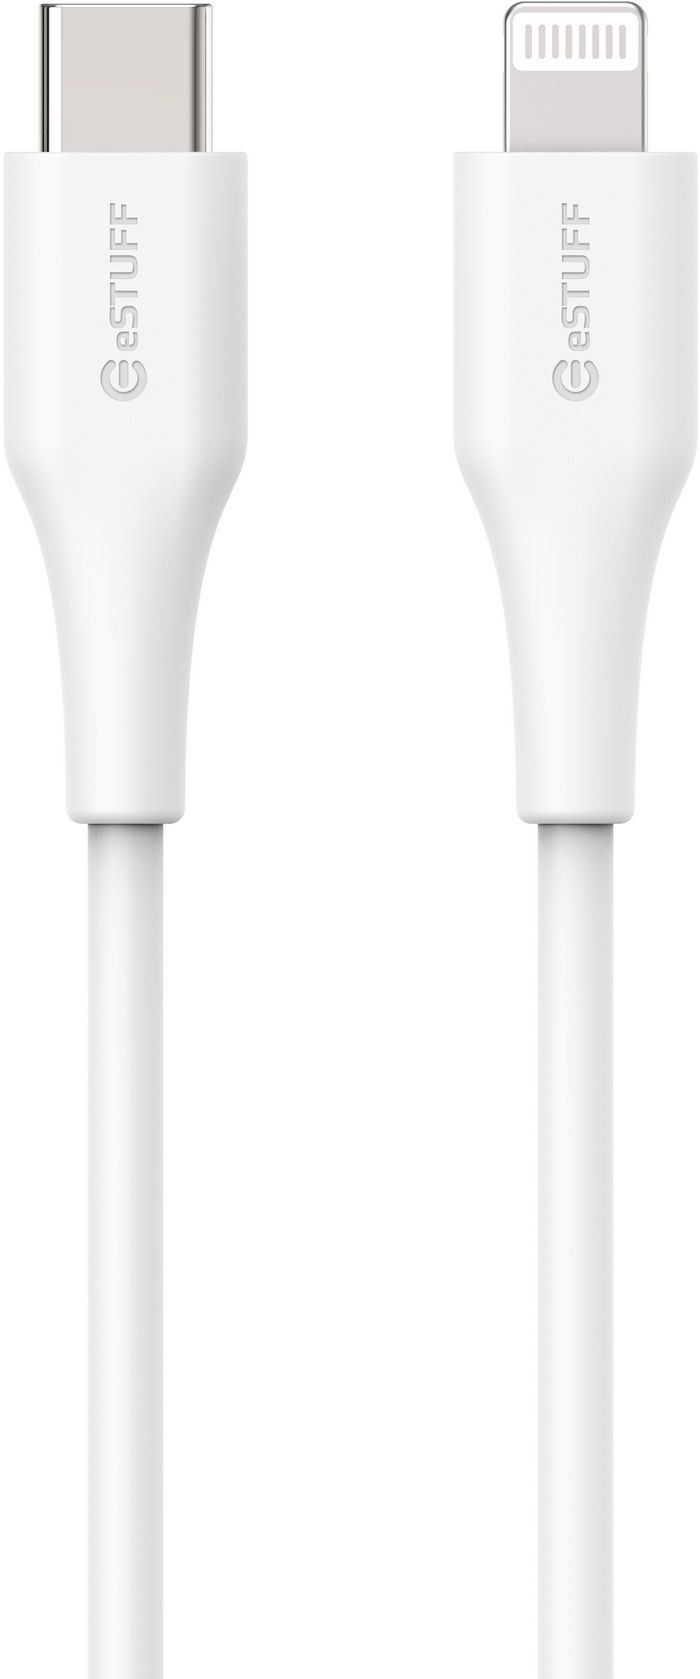 eSTUFF INFINITE Super Soft USB-C to Lightning Cable to Cable MFI 1m White - 100% Recycled Plastic - W127221735